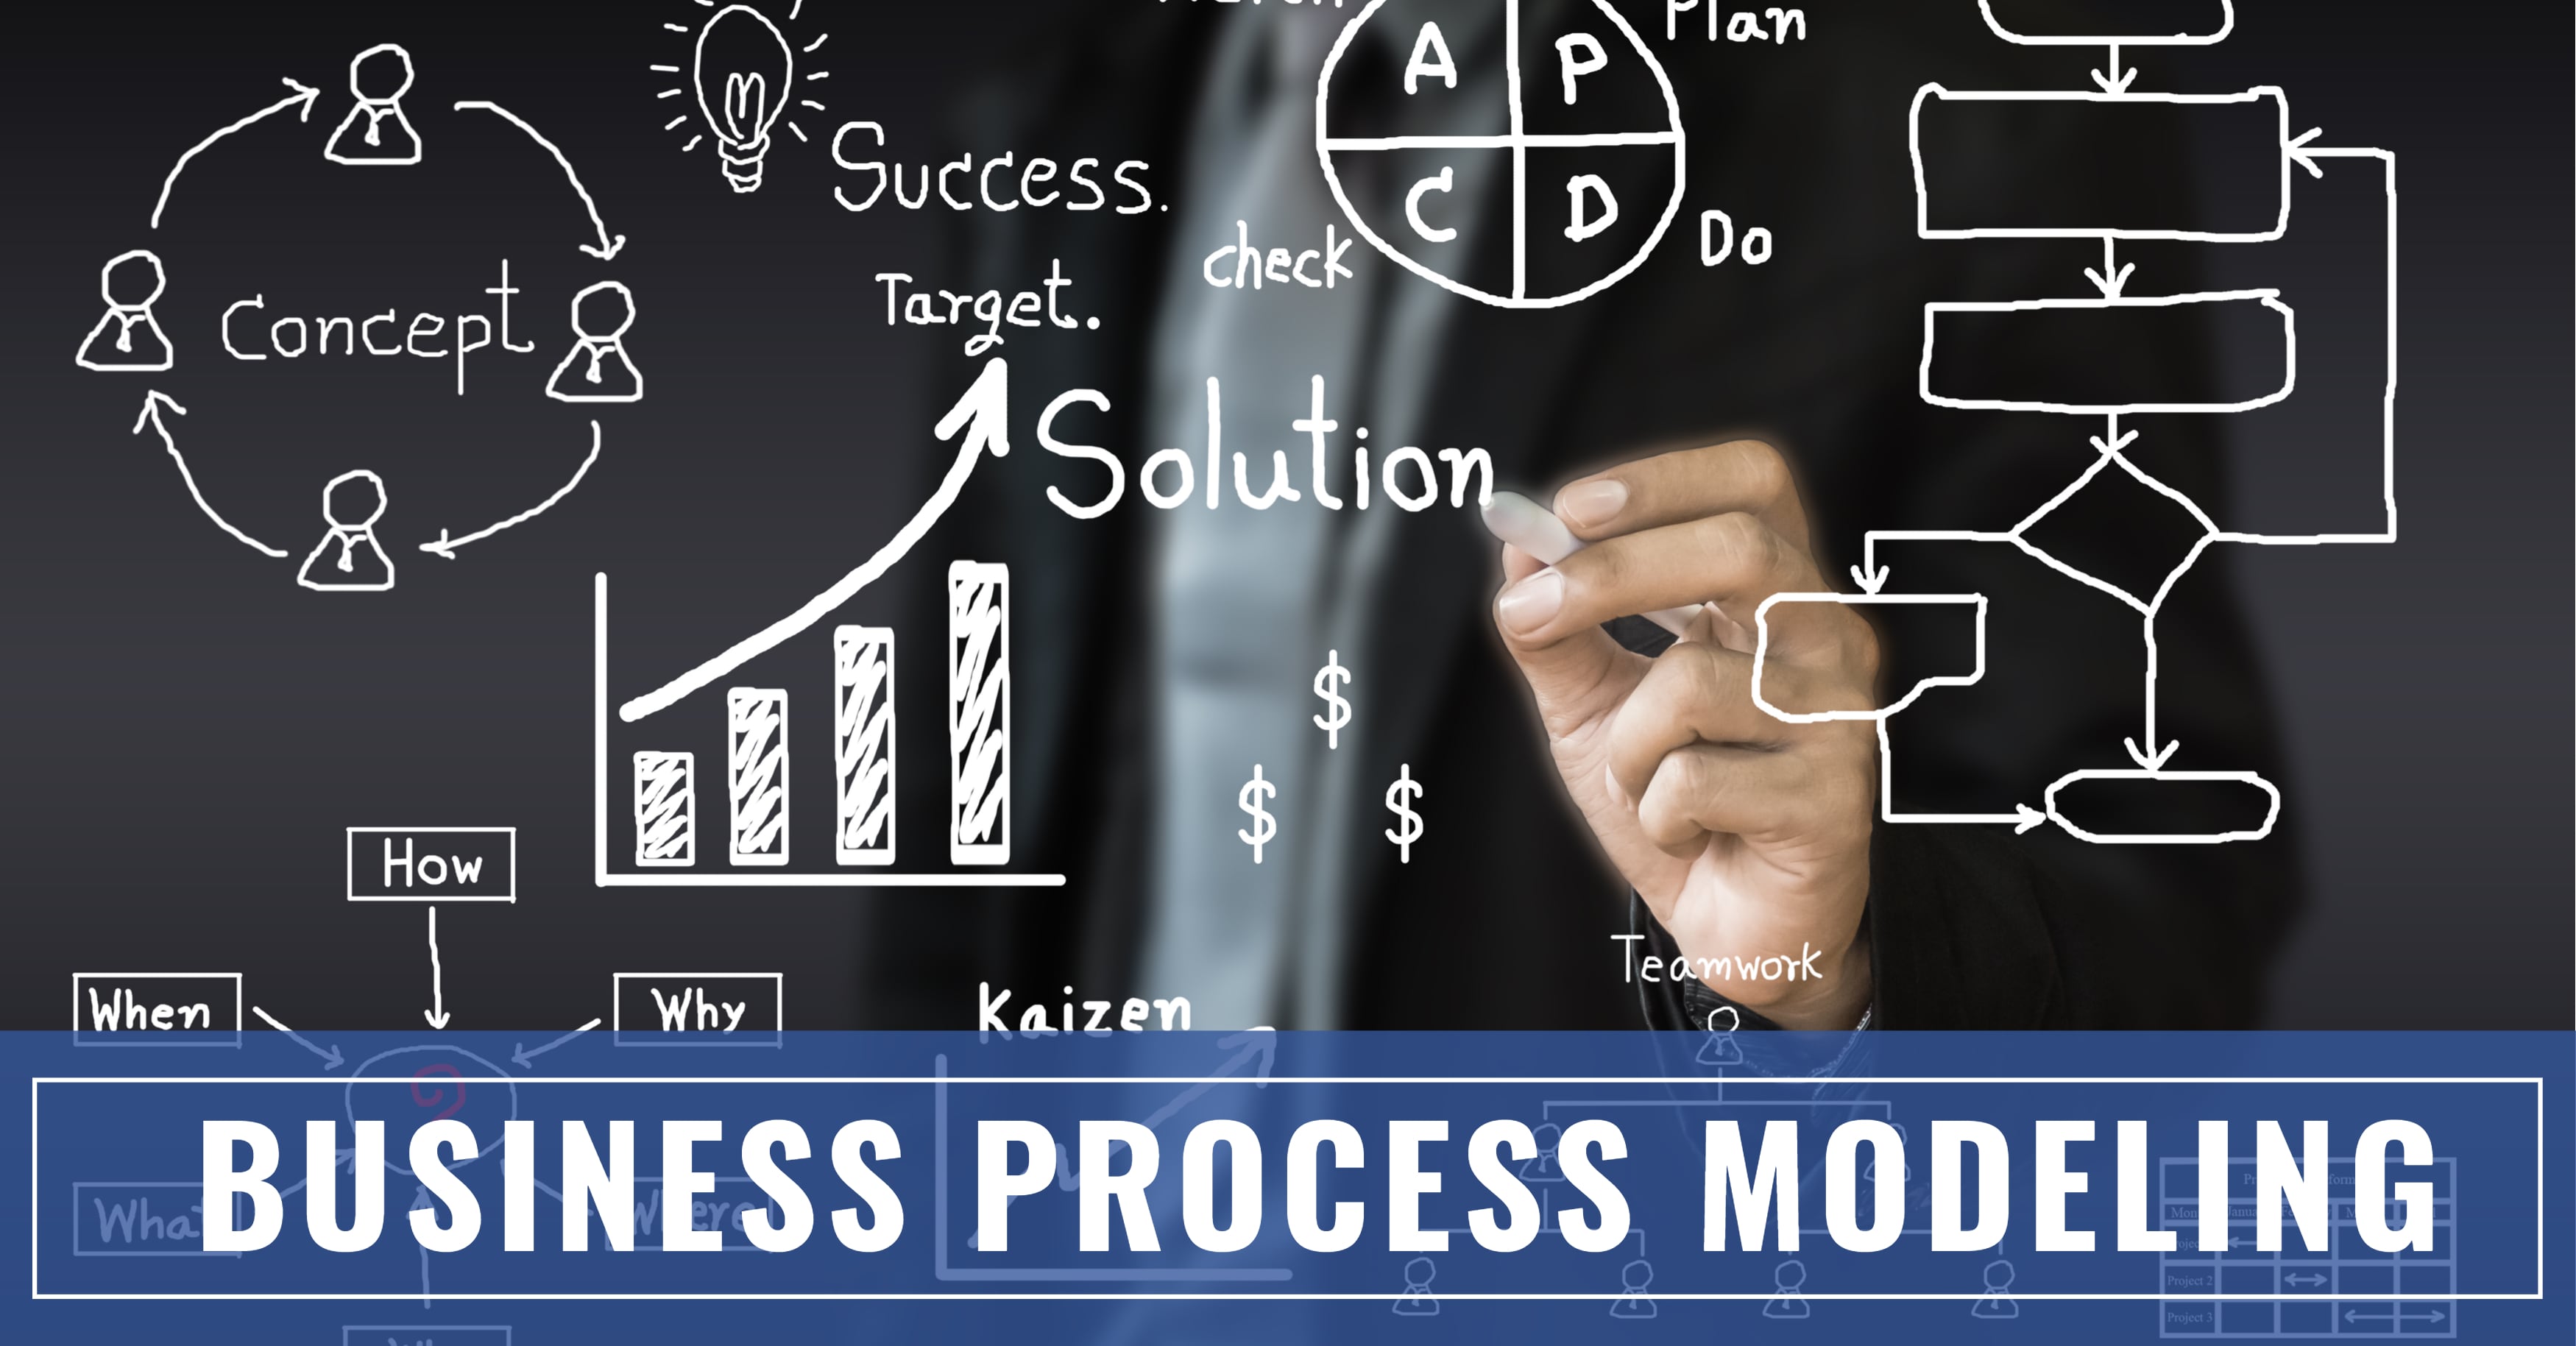 Common Misconceptions About Business Process Modeling